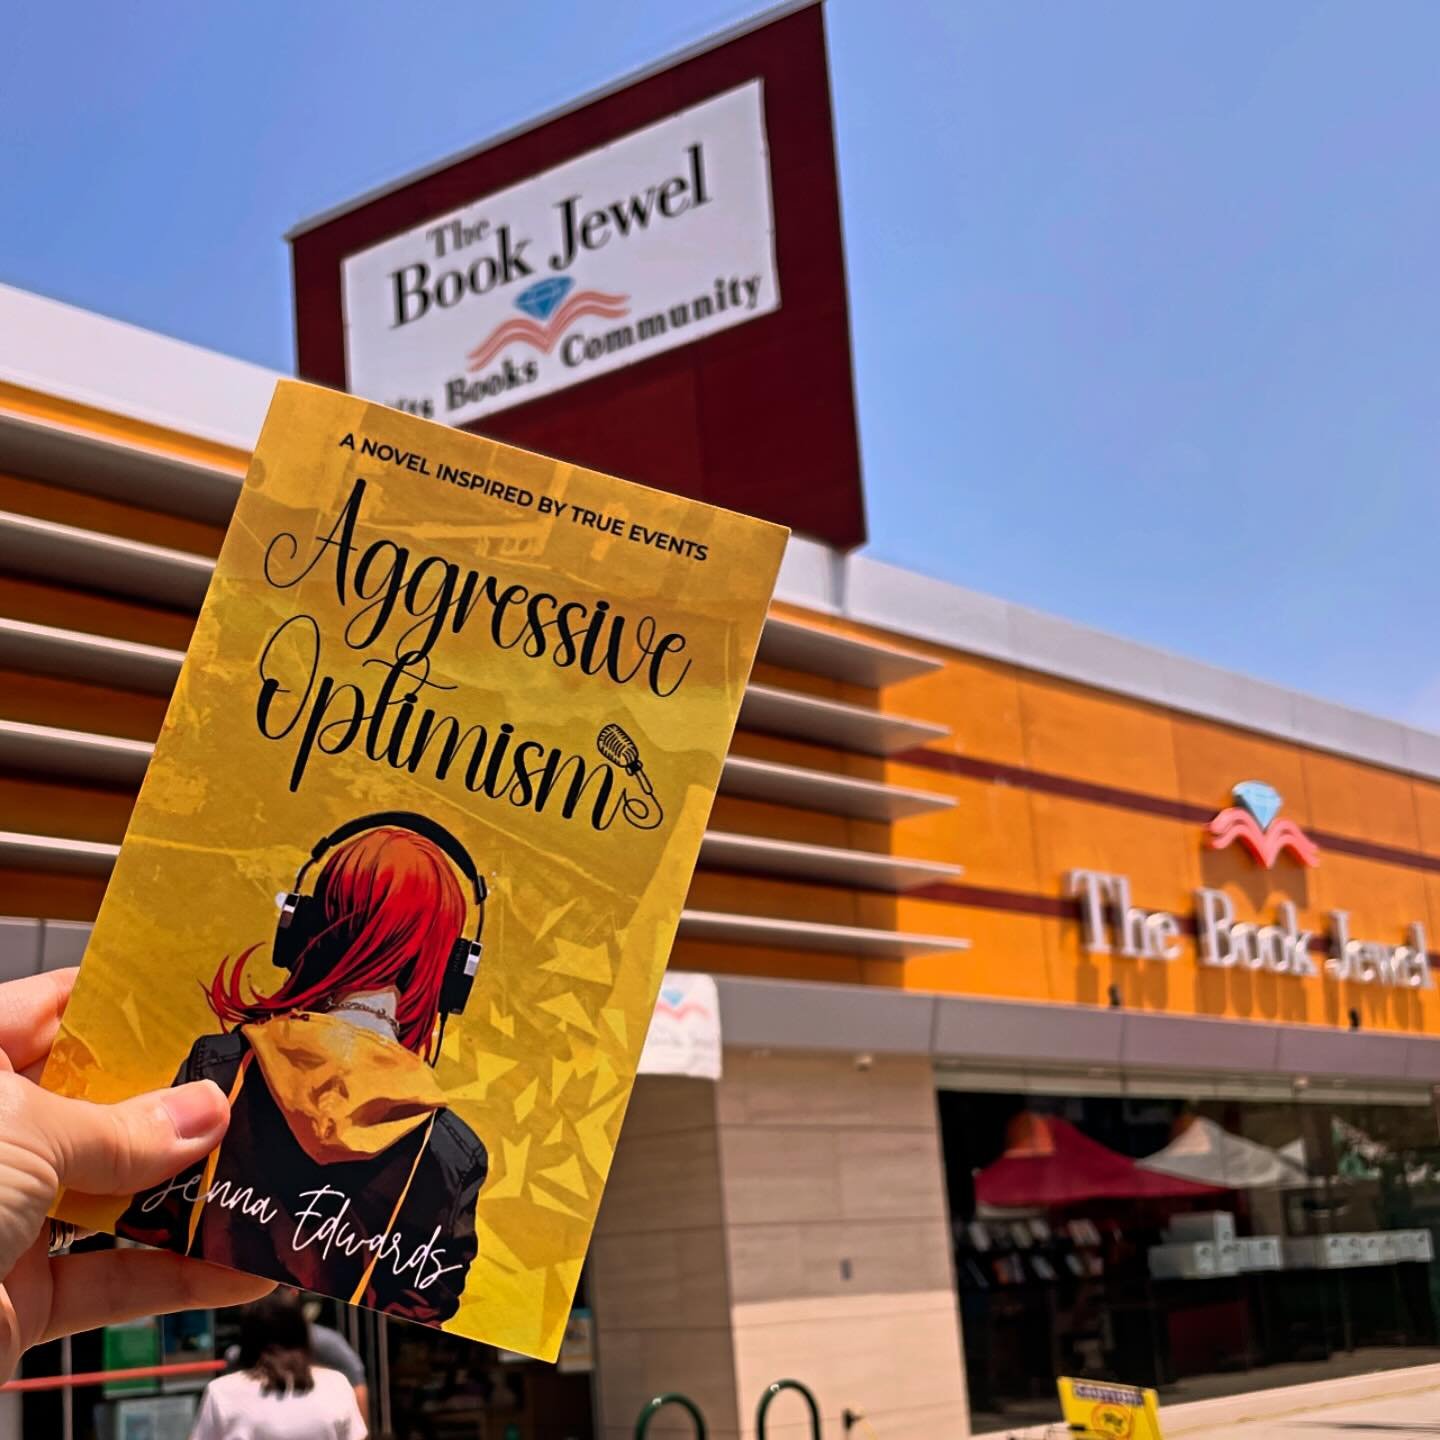 calling all #losangeles Rebels! ✨💛✨ my book is now at @thebookjewel in Westchester near #LAX - in preparation for my #authorsigning on June 1st. 

Go grab your copy and come to the event so I can say hi and sign it 😊😊😊 and share with your friends